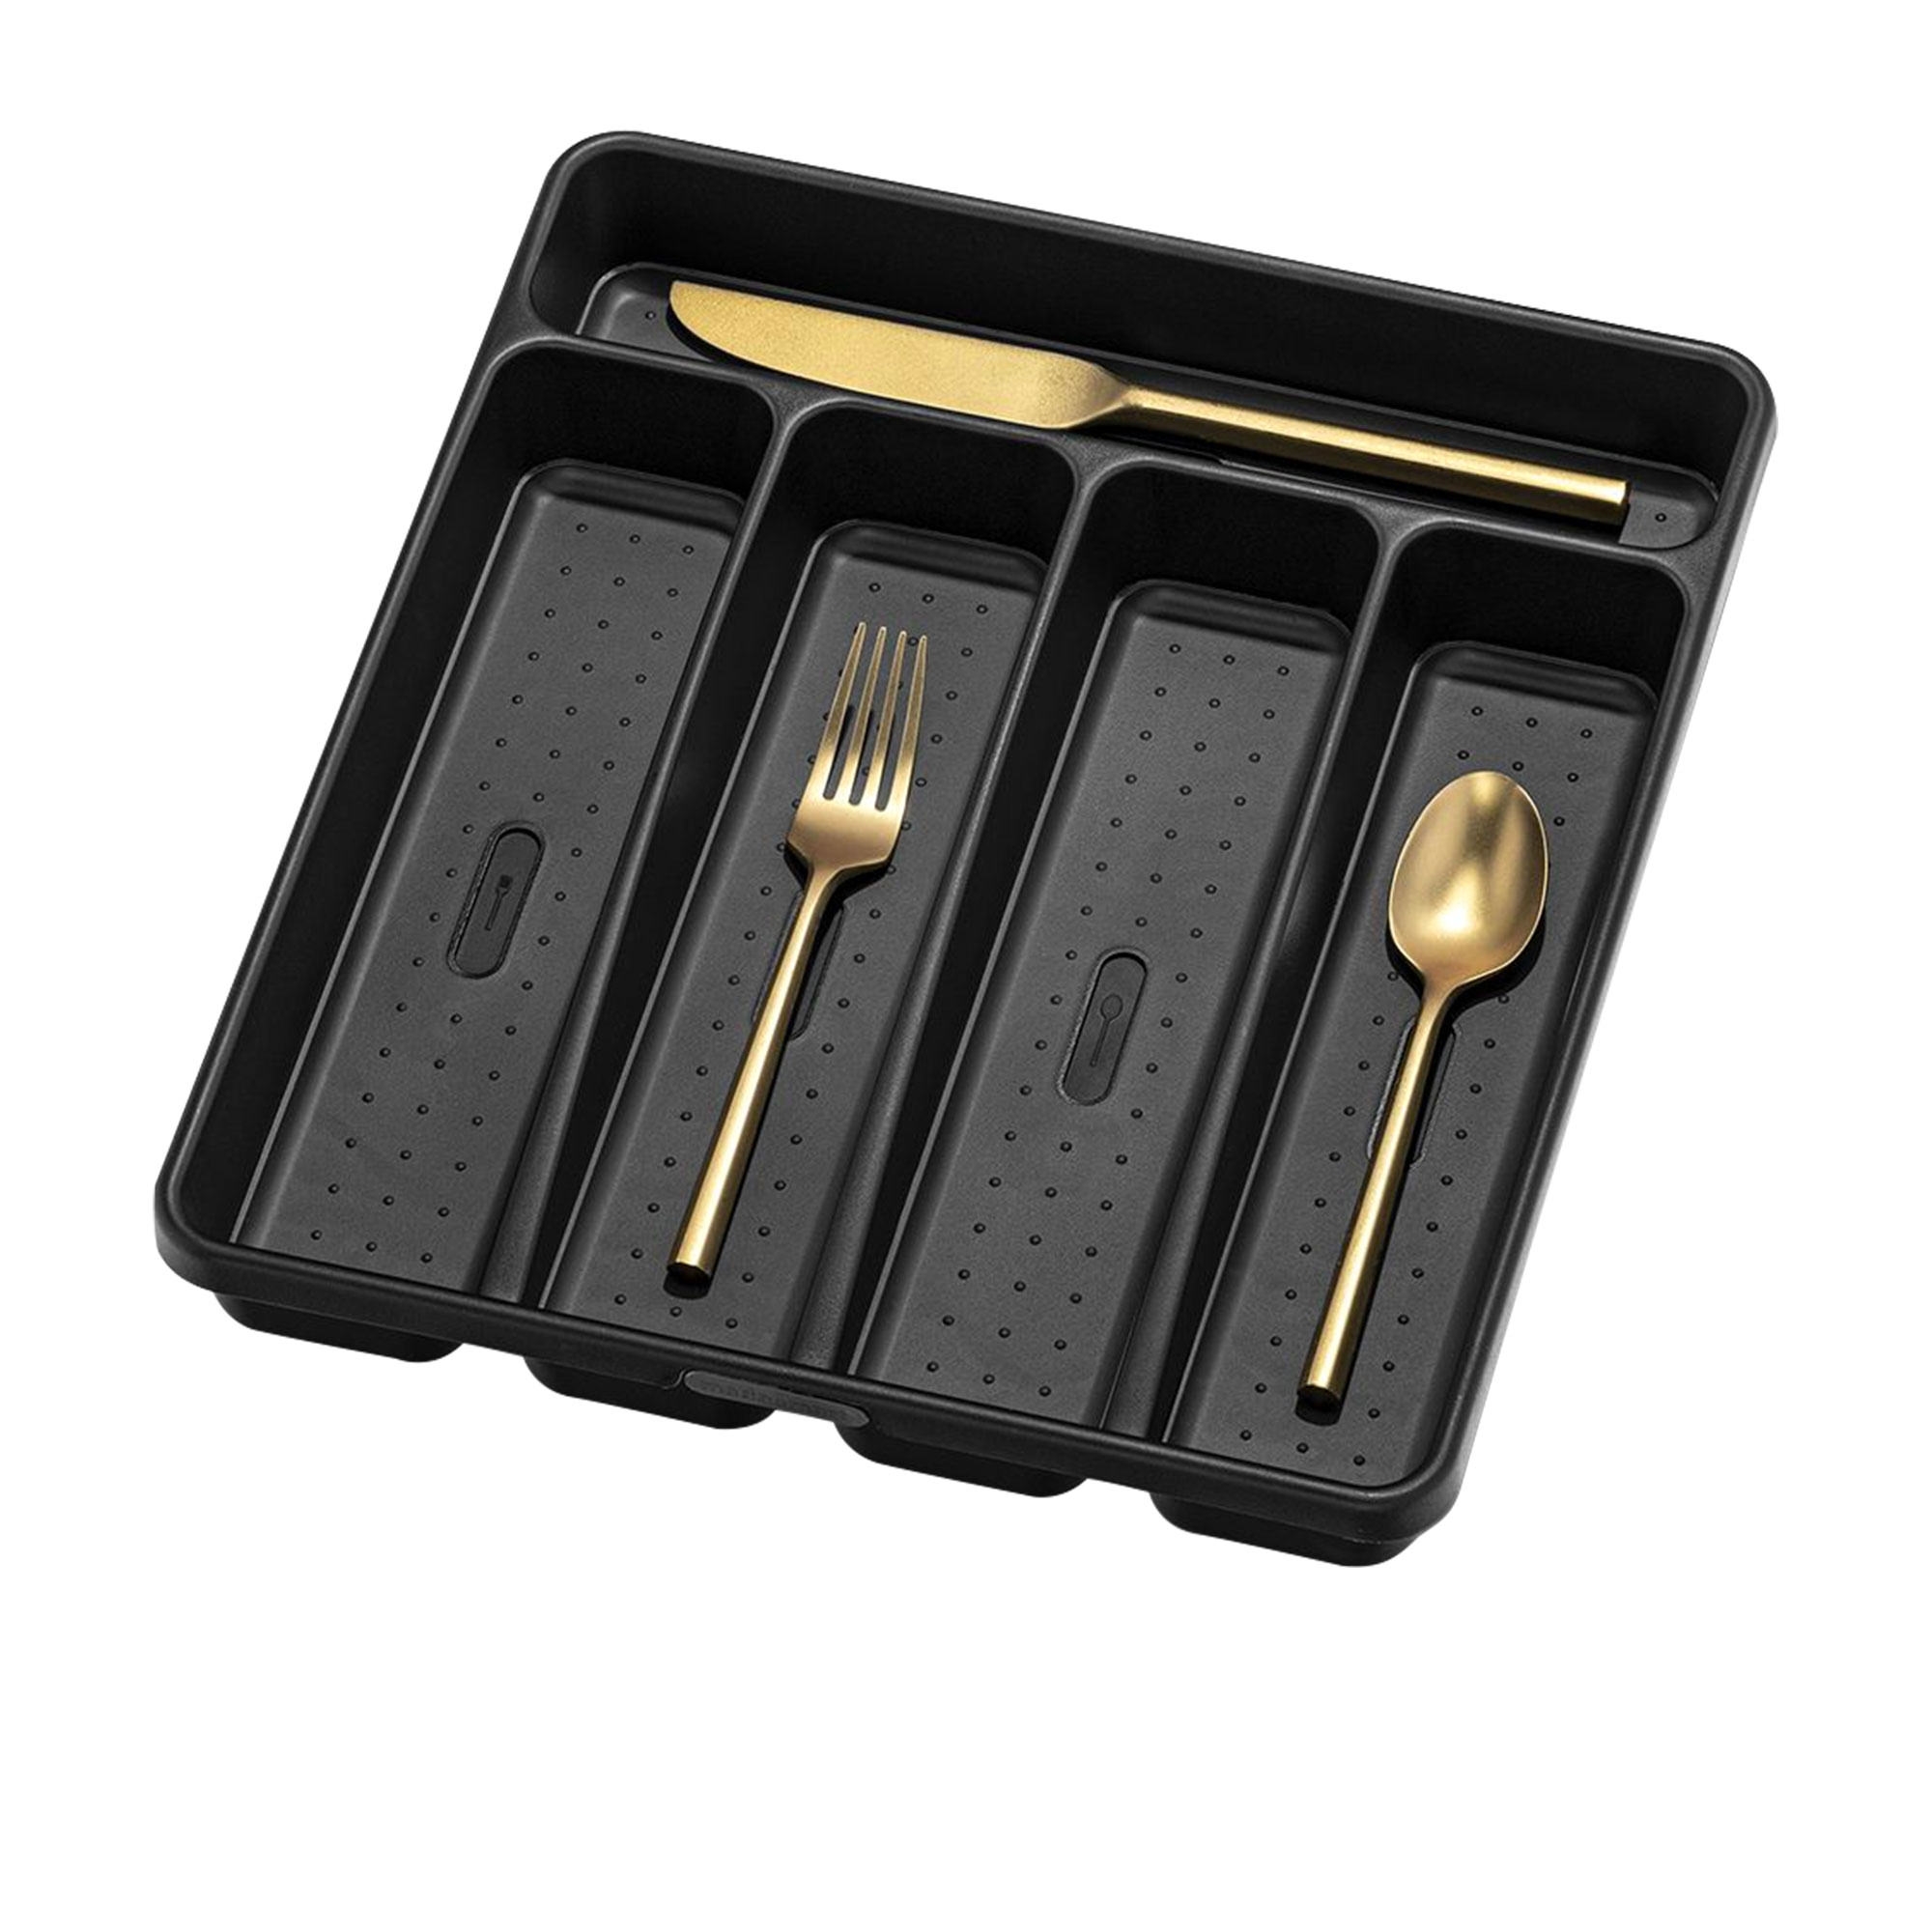 Madesmart Cutlery Tray 5 Compartment Carbon Image 2